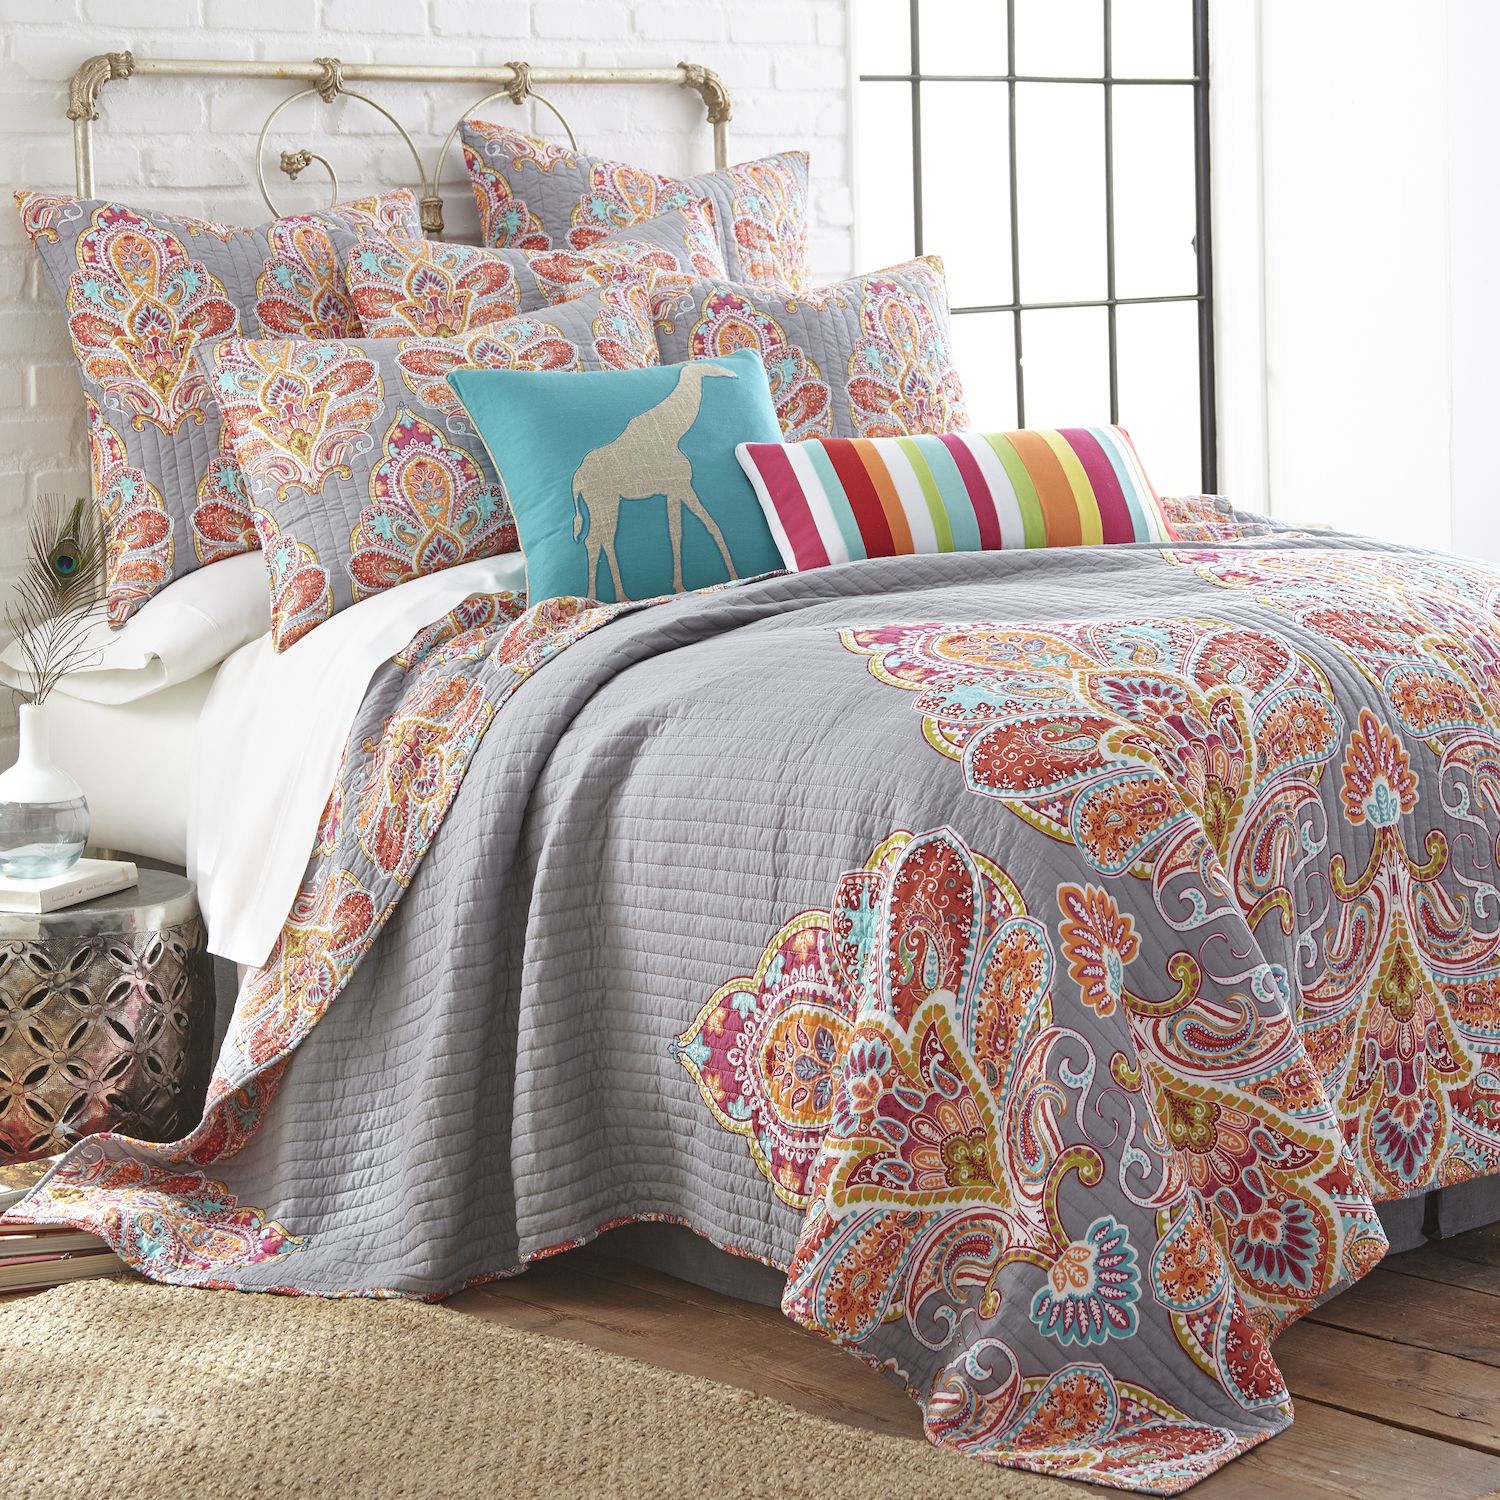 Image for Levtex Home Adriana Quilt Set at Kohl's.